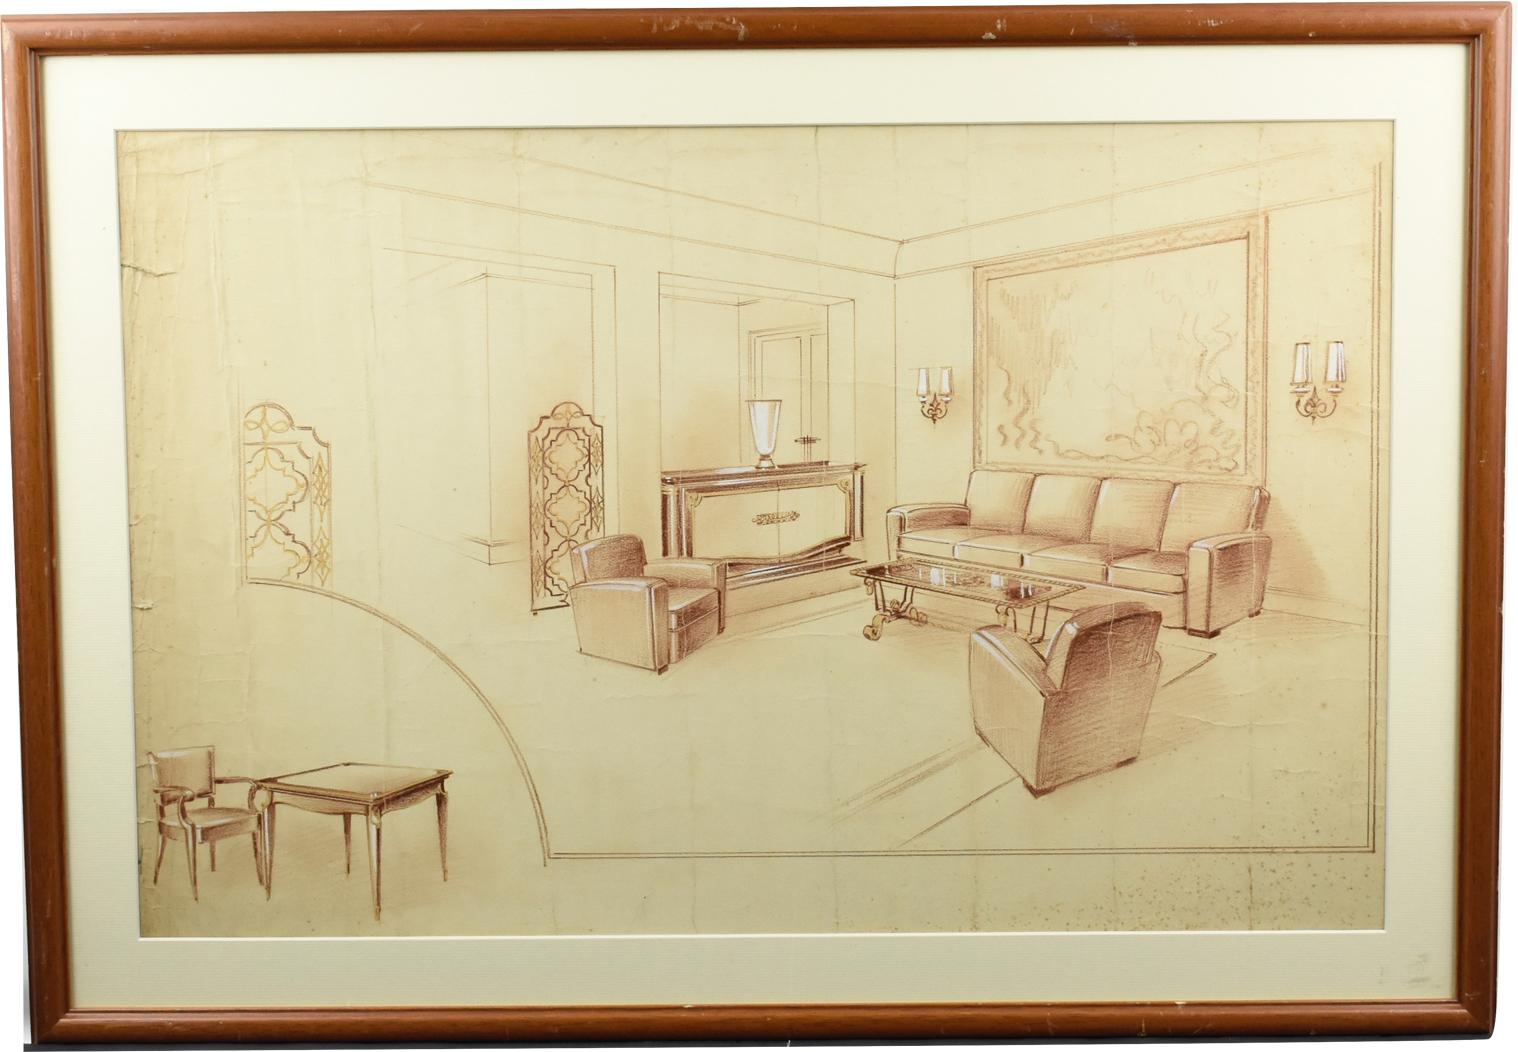 French Interior Decoration Project Study by Maurice Dufrene Studio, 1940s - Art by Maurice Dufrêne